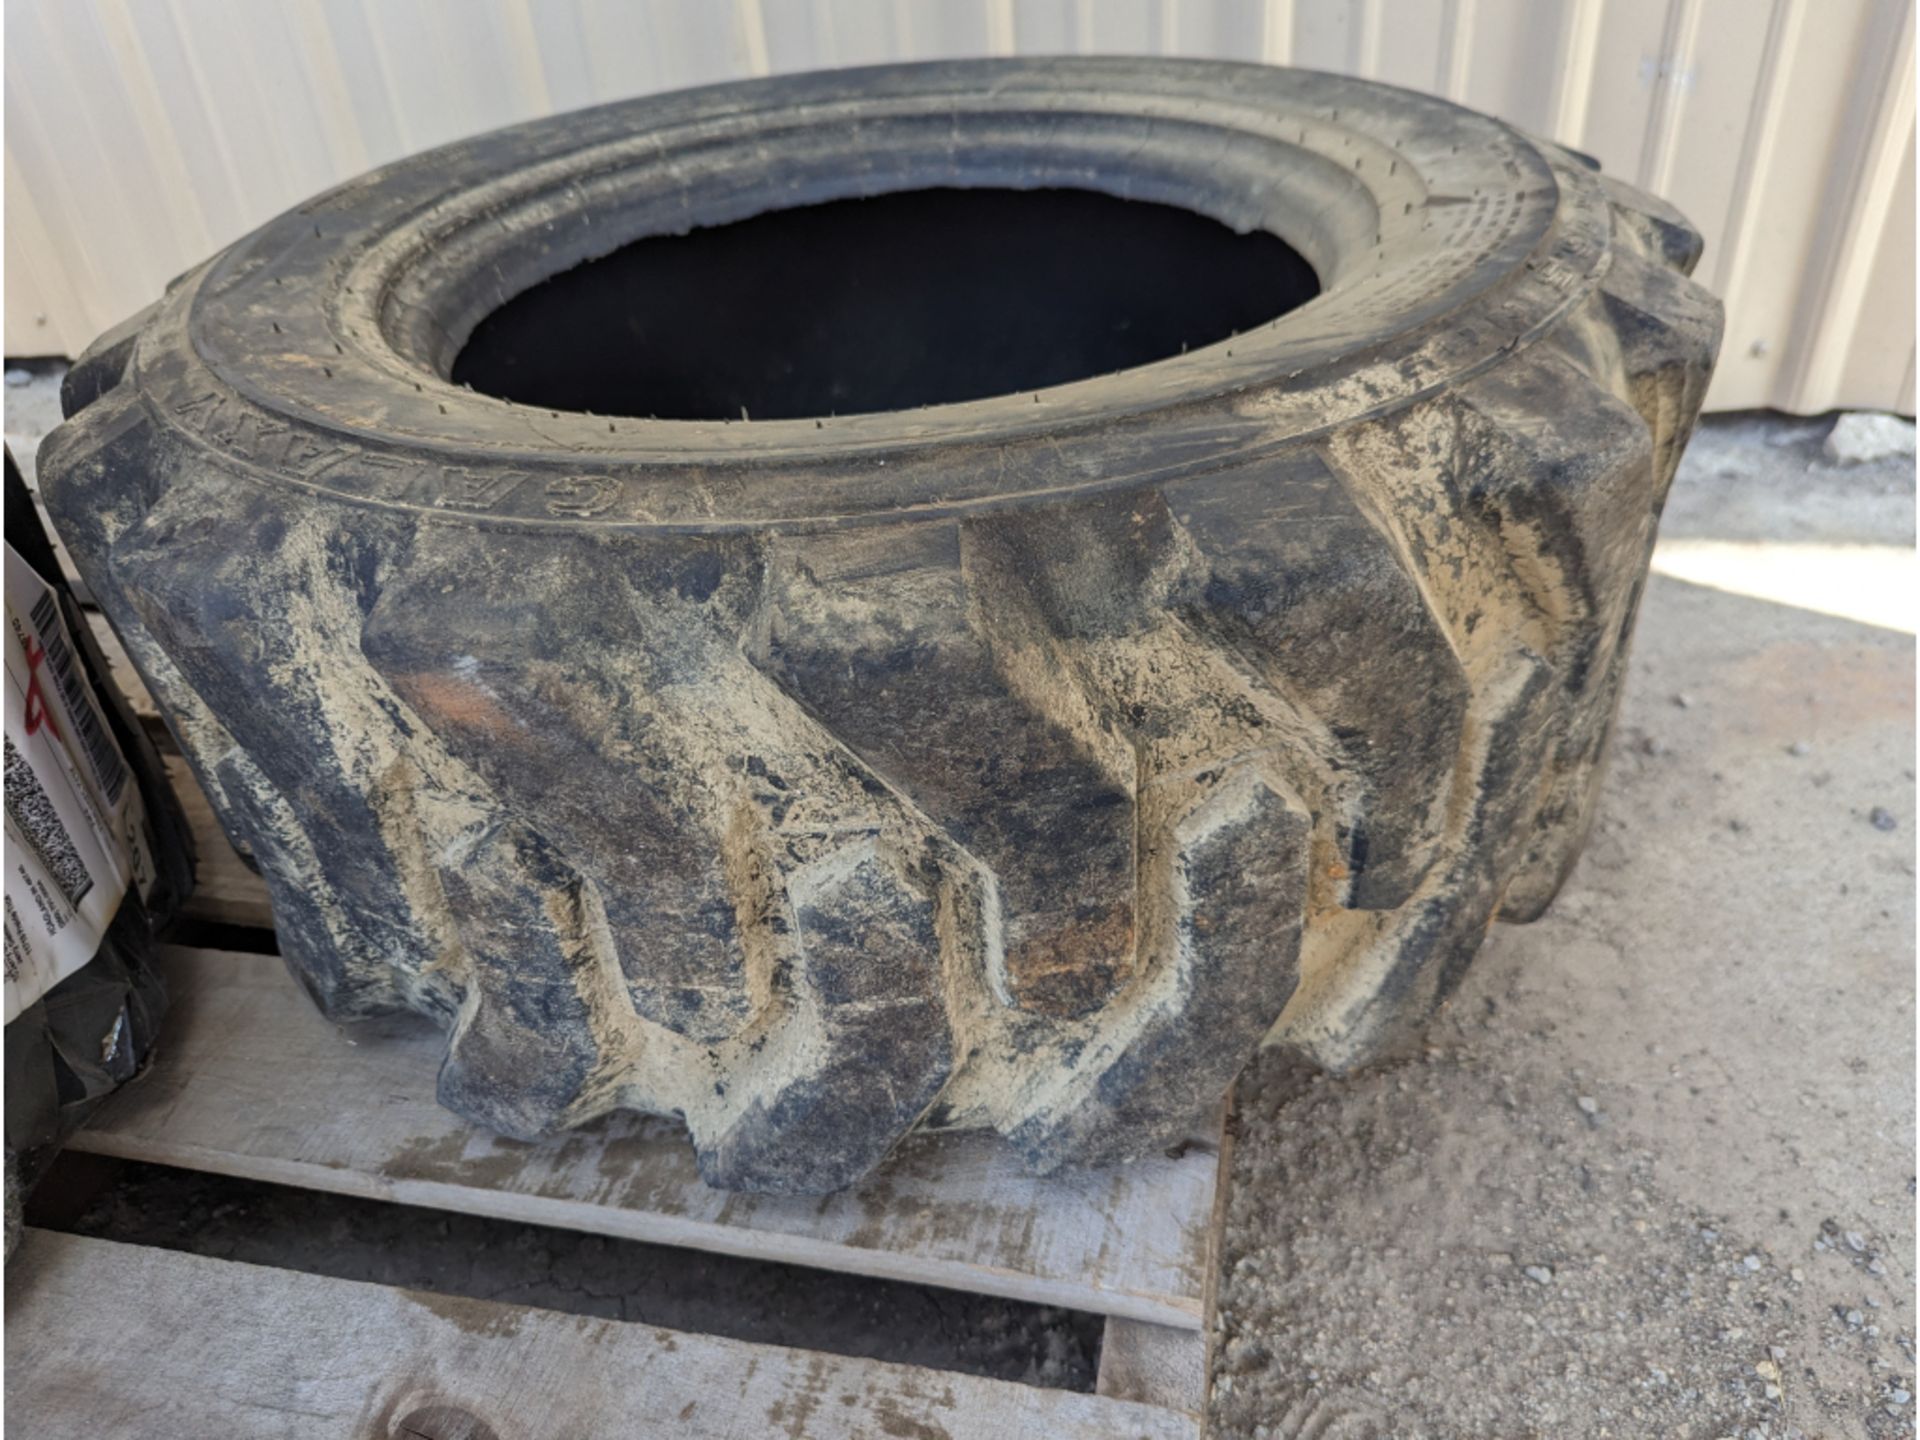 4 NEW Road Crew SKS-1 Skid Steer Tires, 1 Used Tire, 10-16.5 - Image 8 of 10